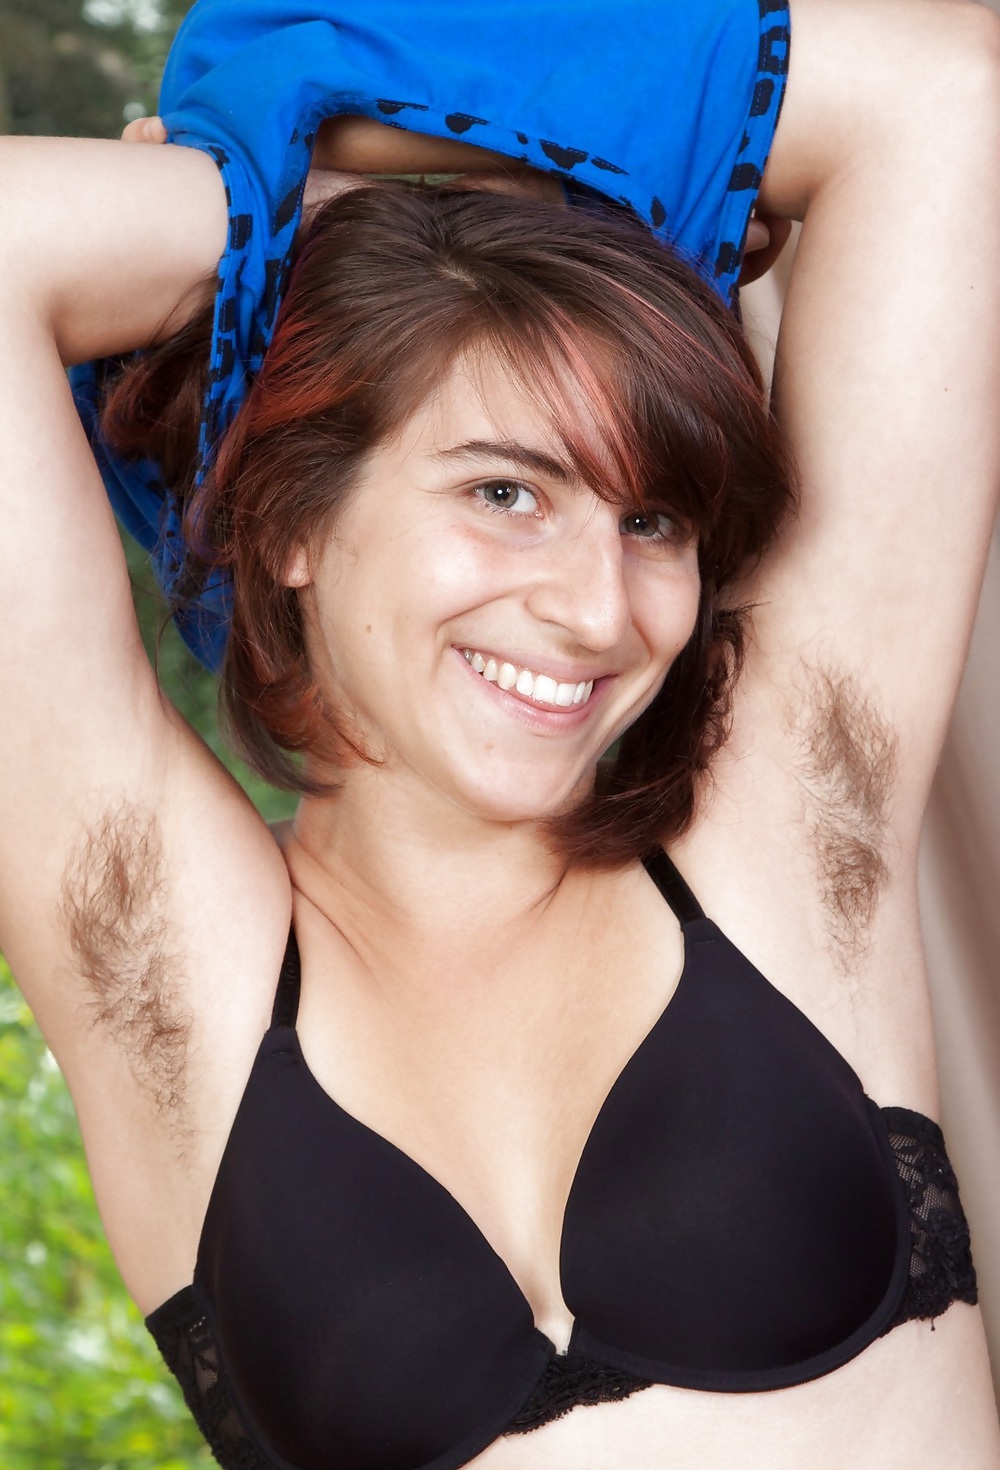 Miscellaneous girls showing hairy, unshaven armpits 3 #36174492